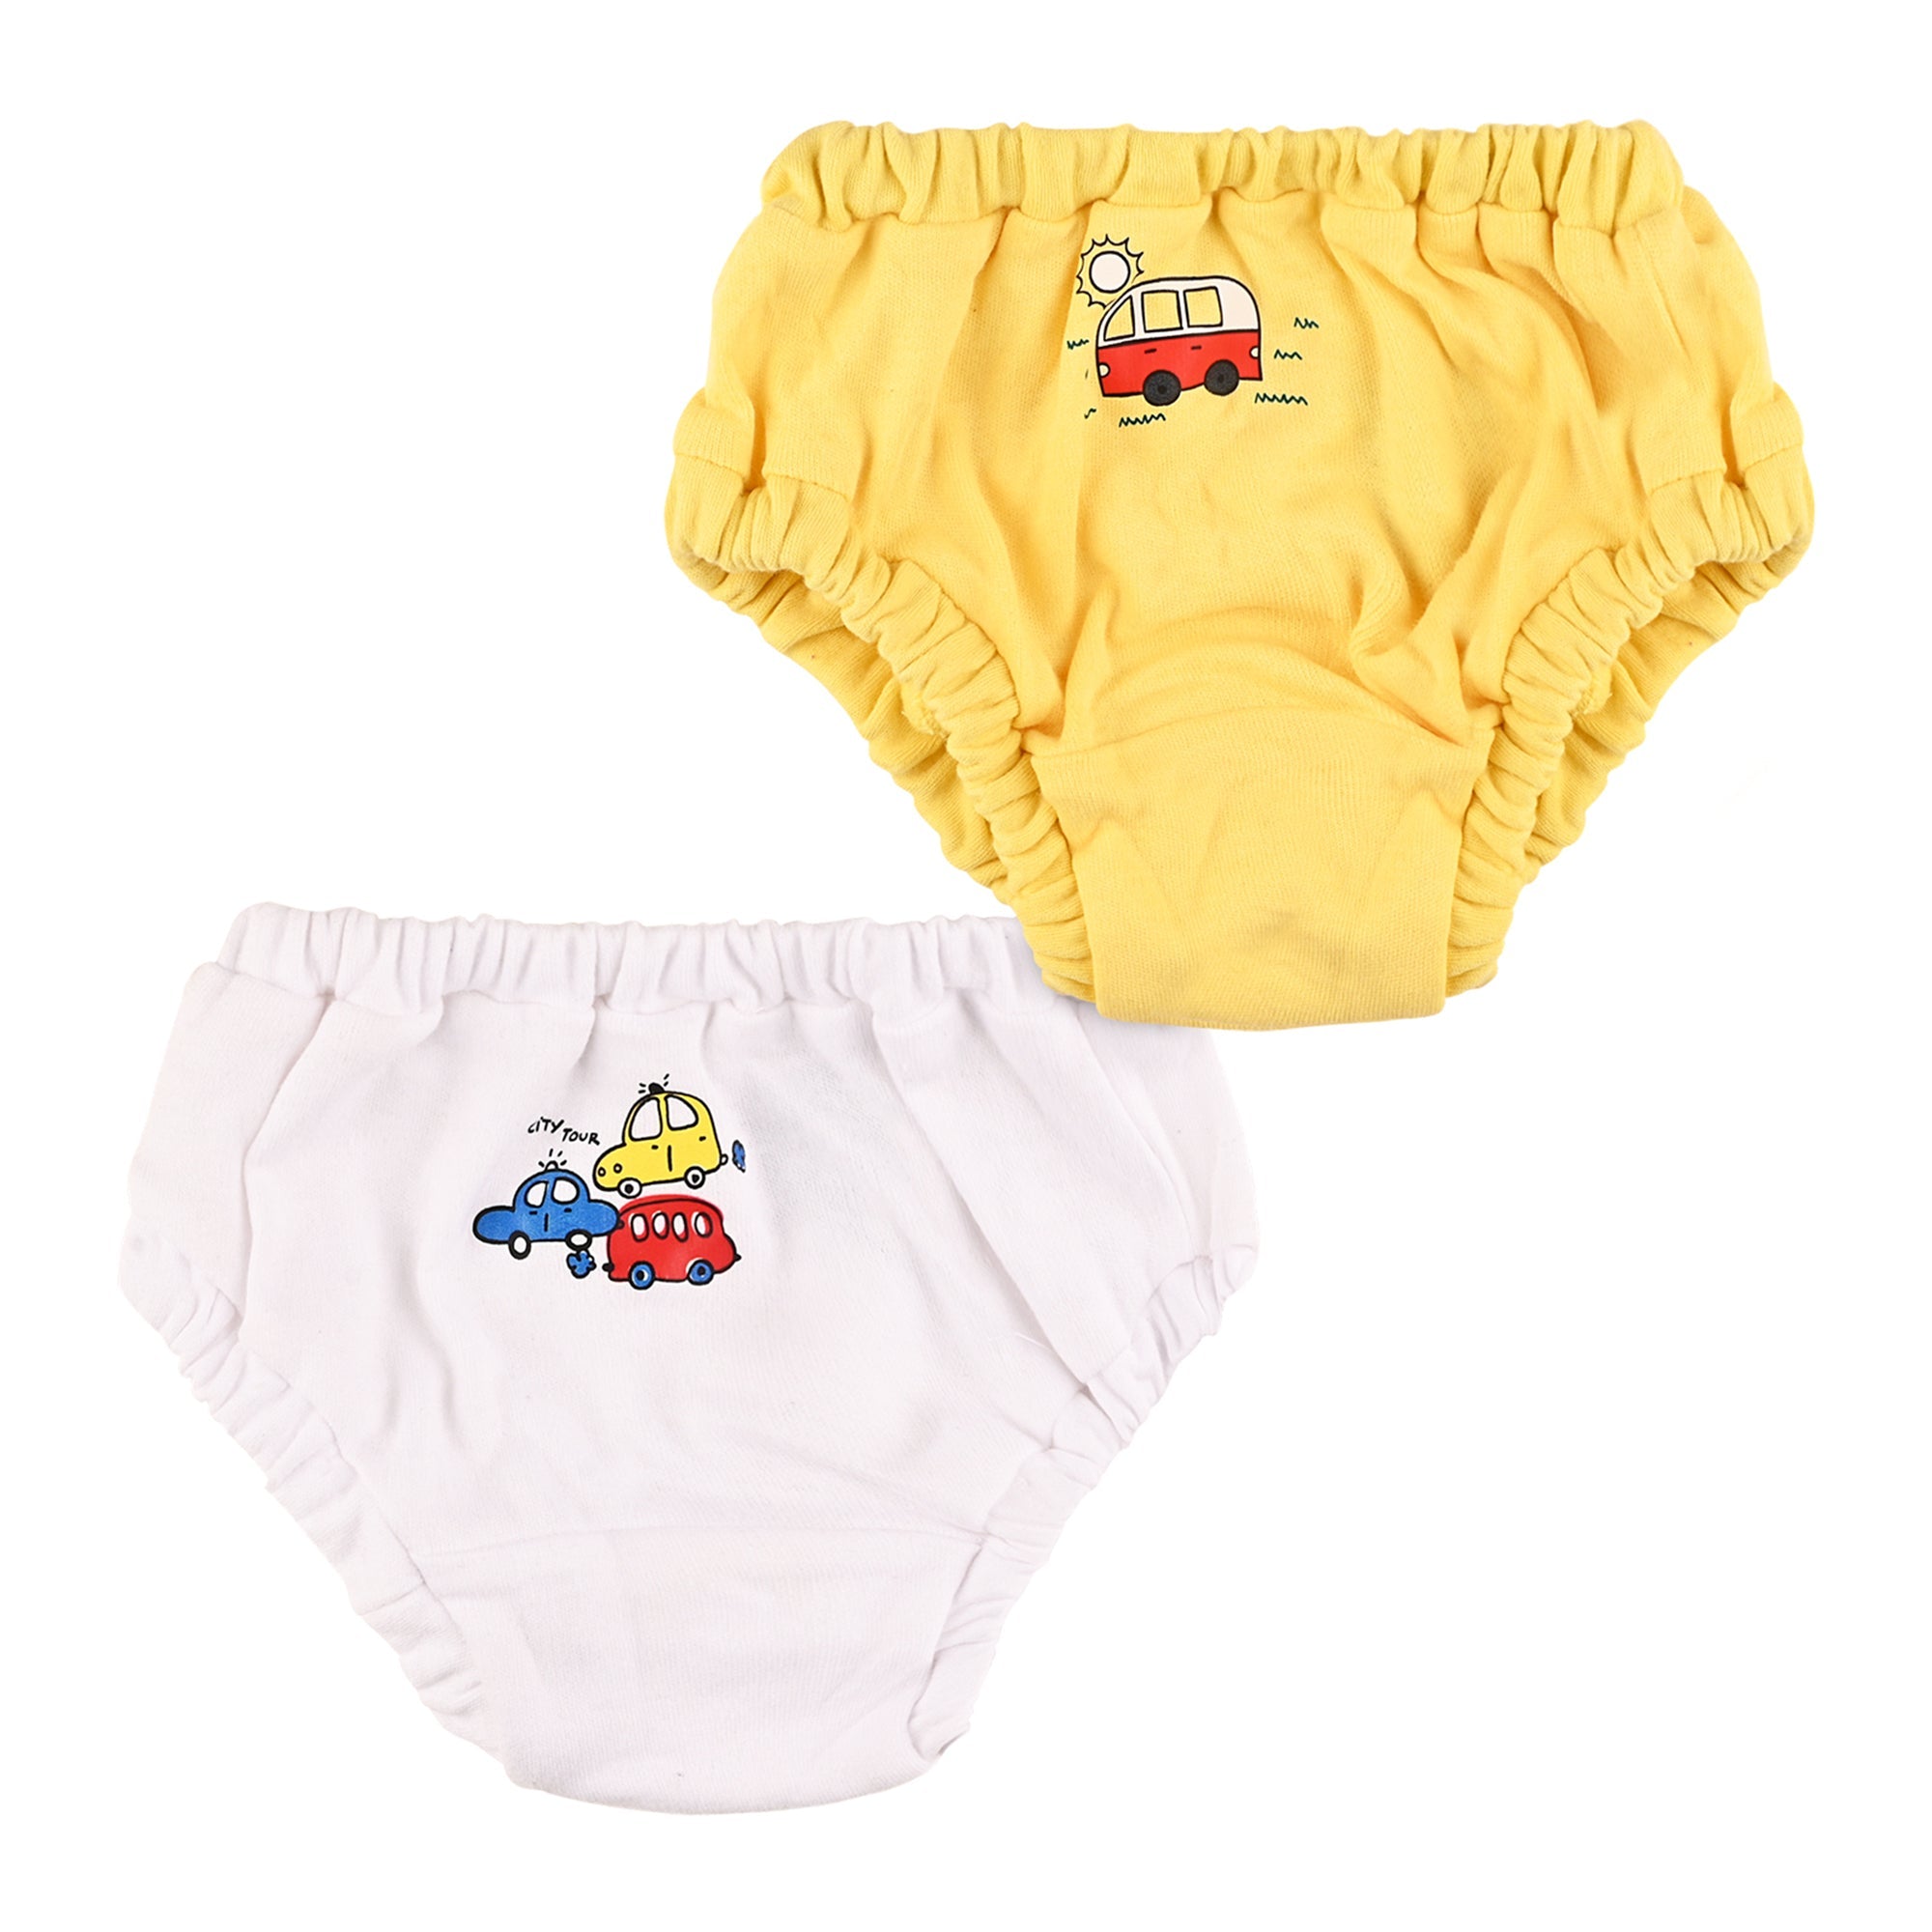 Nuluv Boys Brief - Style Incut - Toys4All.in